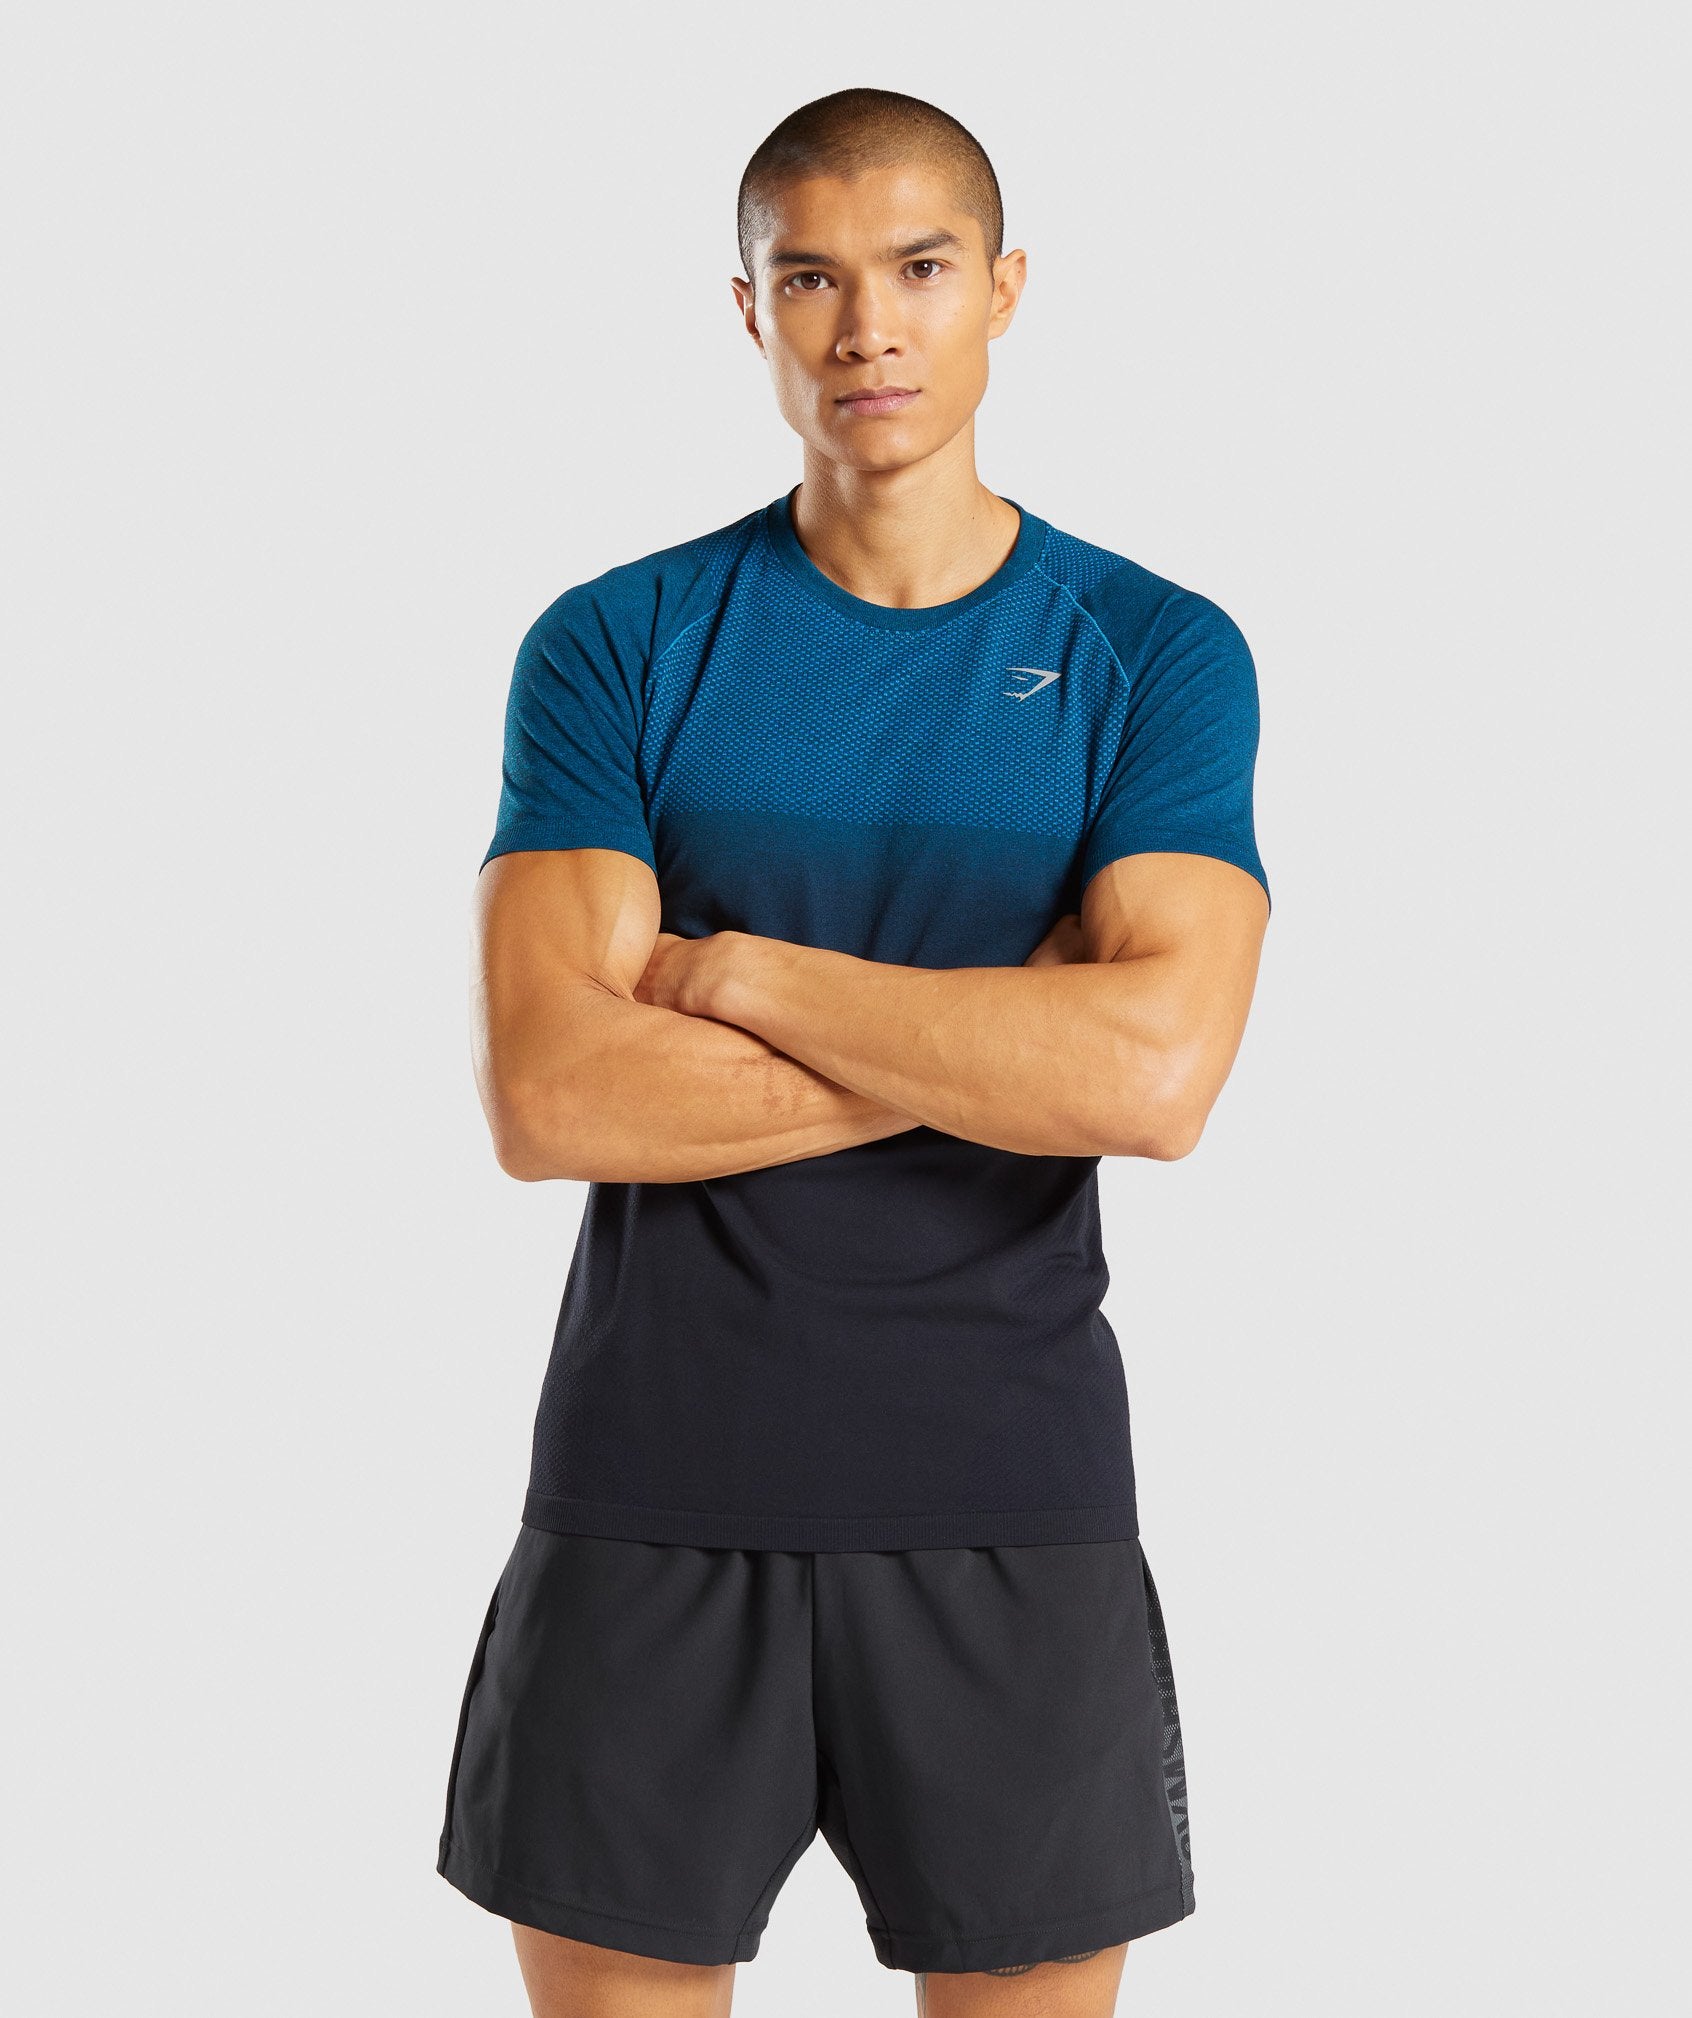 Vital Ombre Seamless T-Shirt in Teal Marl/Black - view 1